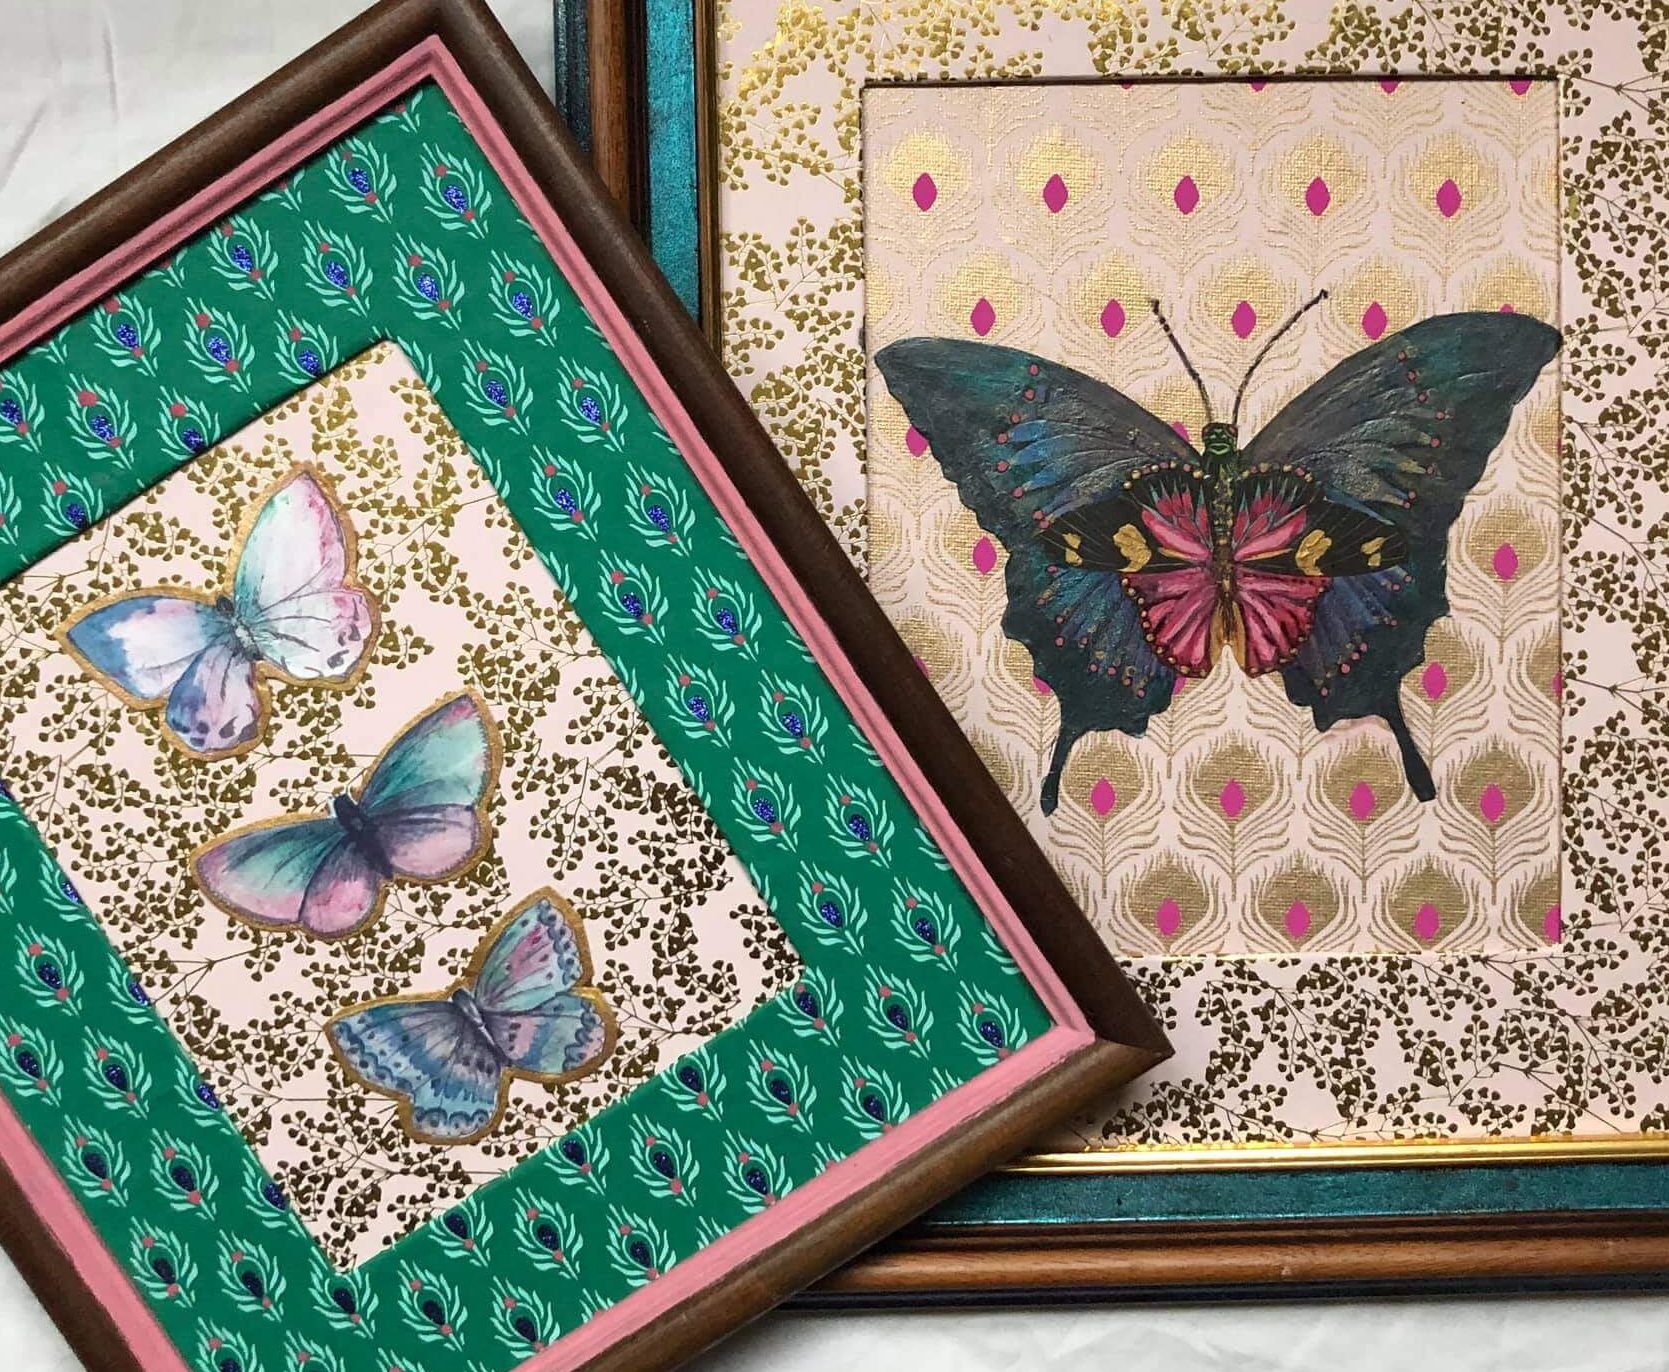 "Mixed Media Collage 3 small Butterflies and 1 large " for sale by Emma Mullender